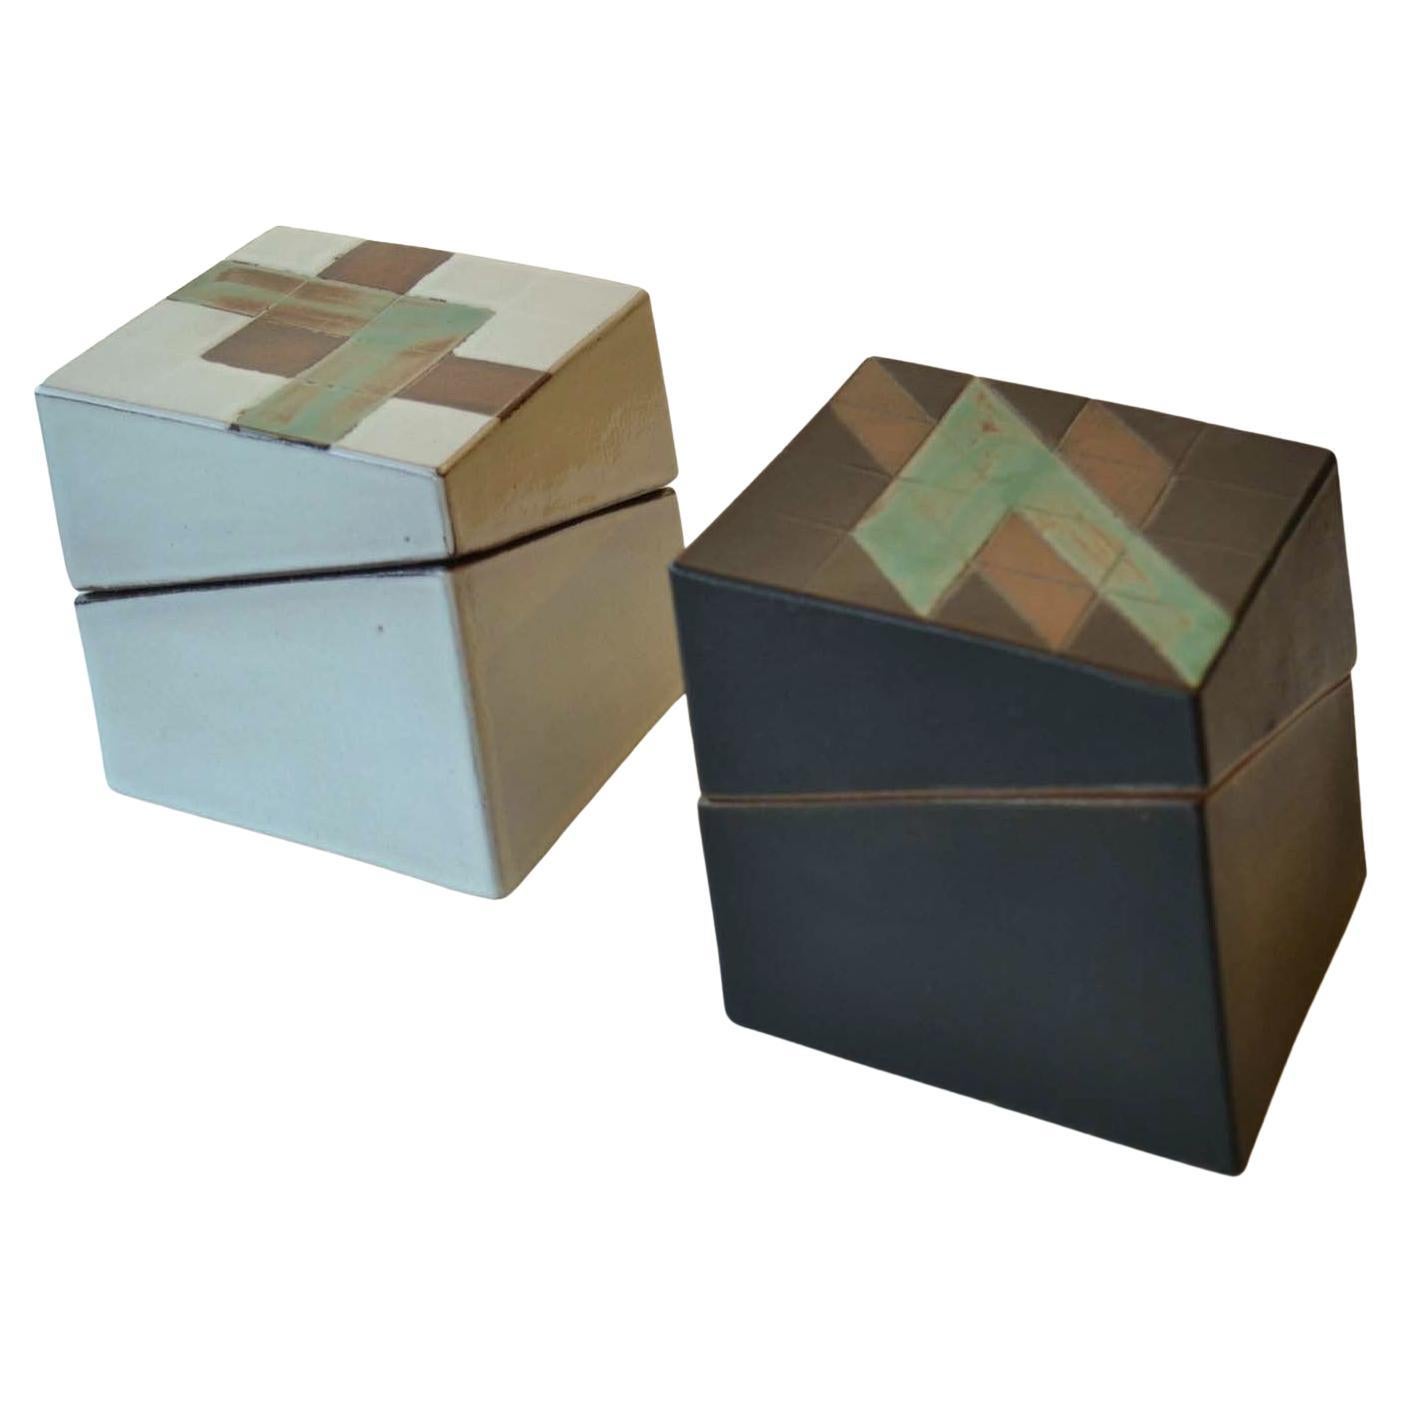 Two leaning square Studio Pottery boxes glazed in black and white with oxide green added in the geometric pattern on top. Sculptural decorative and functional boxes, signed PS are late 20th century. The lids fit precisely on the bases of the